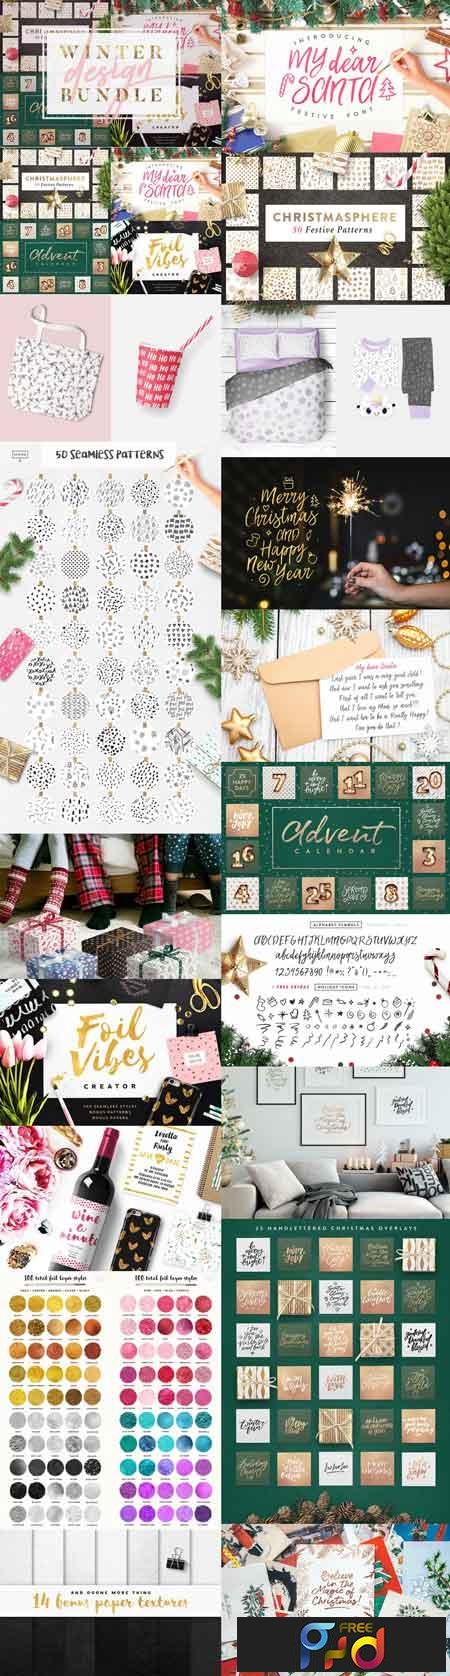 FreePsdVn.com 1814290 TEMPLATE christmas bundle all in one 2950127